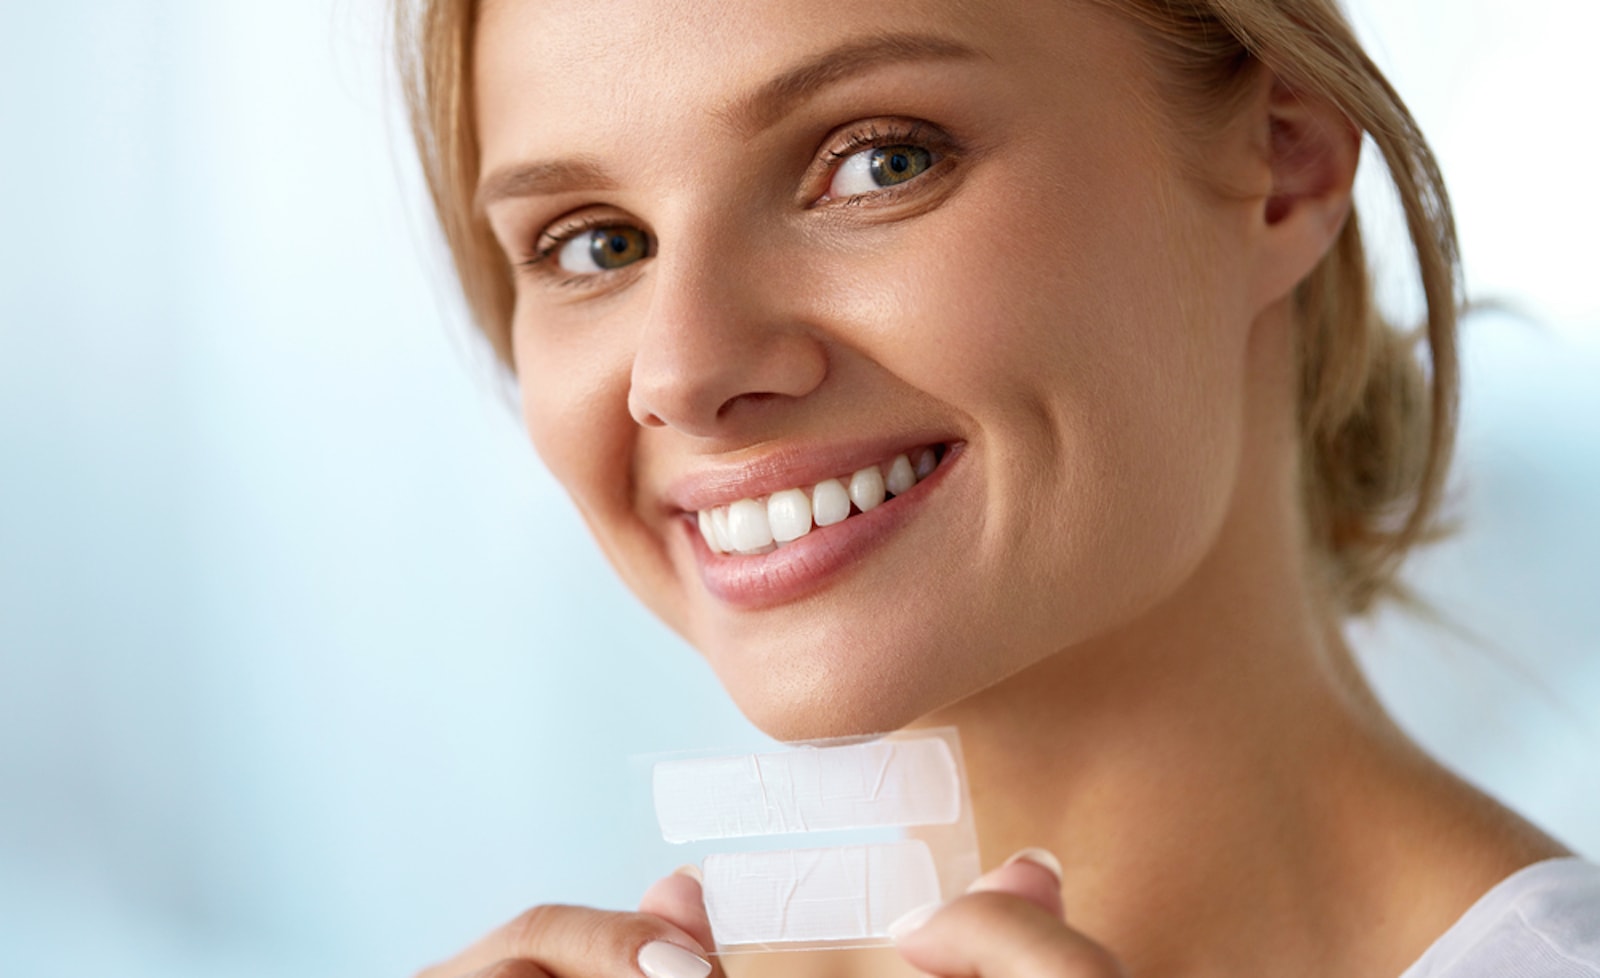 Learn if whitening strips can damage layers of the teeth